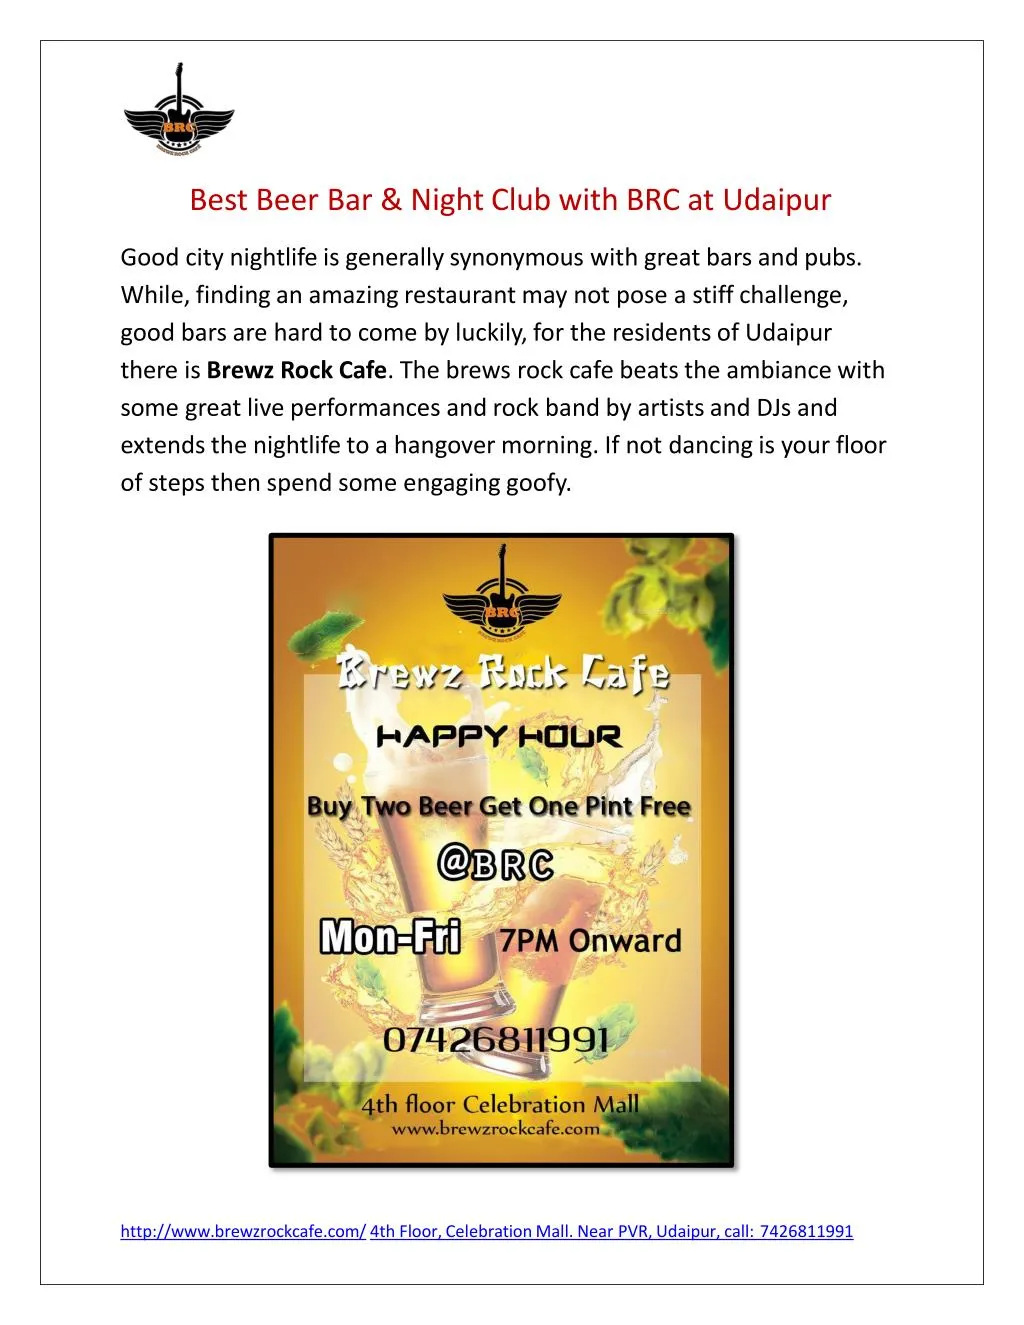 best beer bar night club with brc at udaipur good